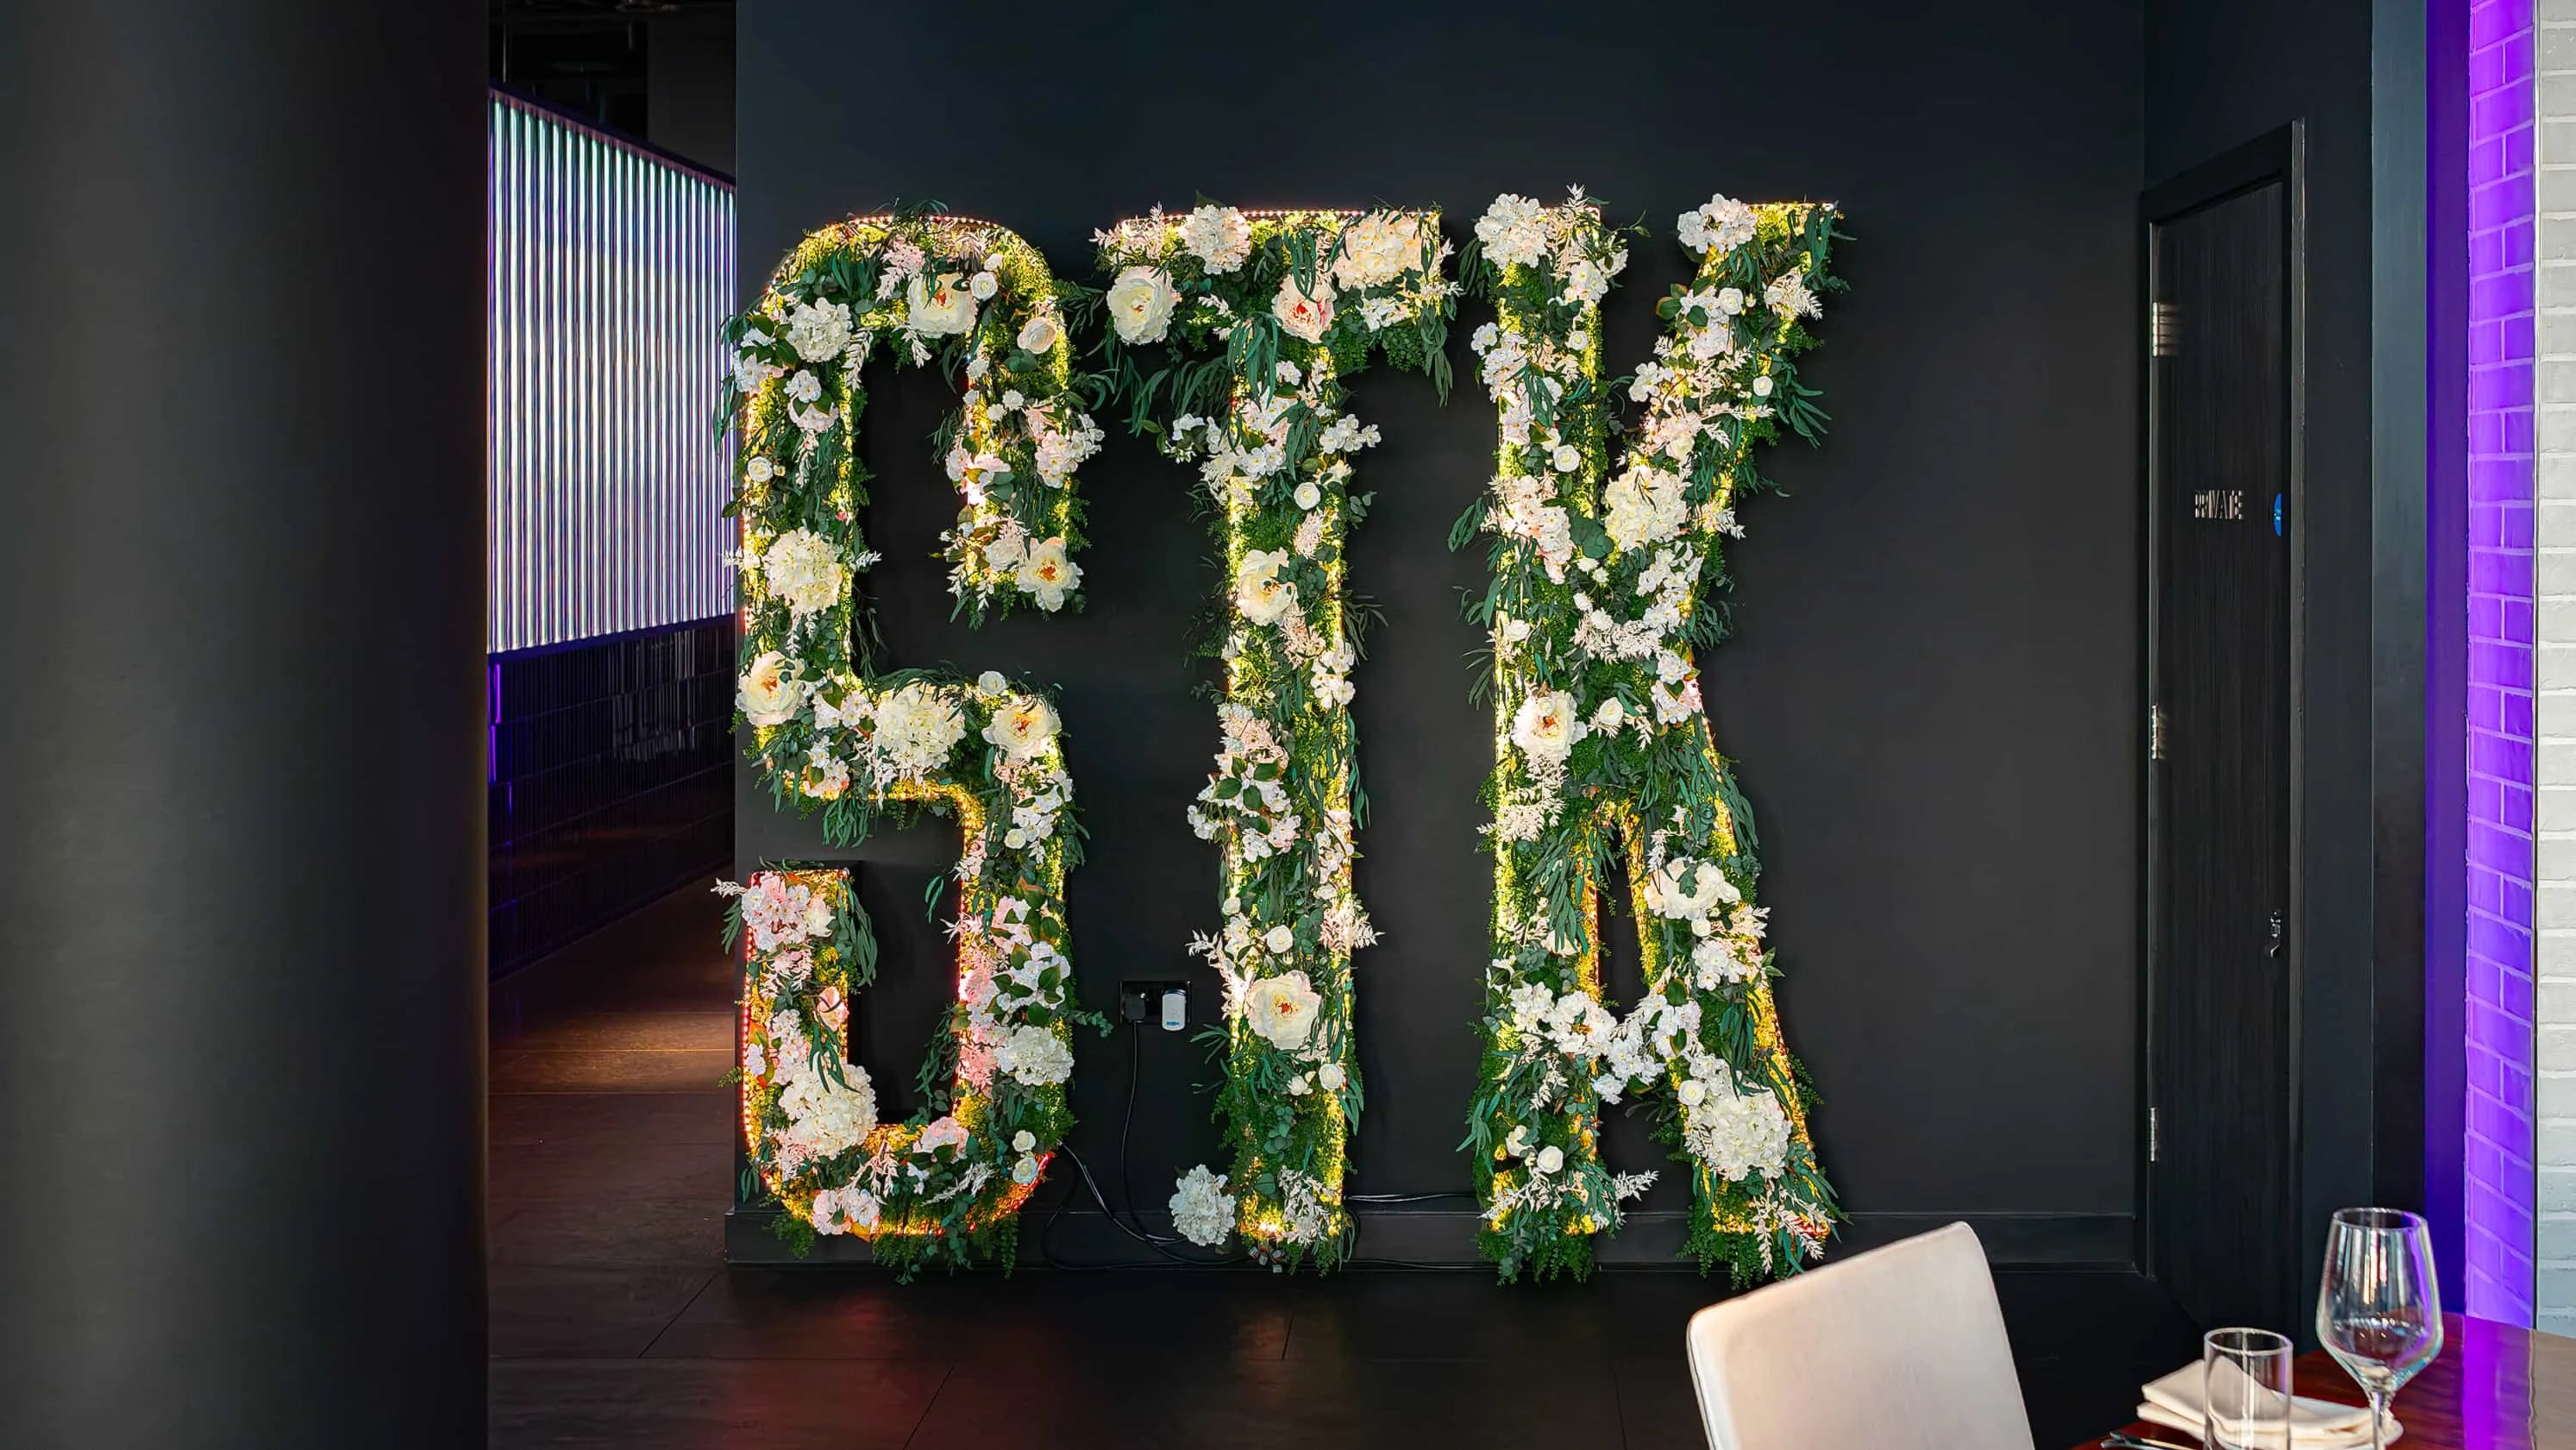 The letters 'STK', the Brand of this famous Steakhouse in London, are artistically fashioned from a vibrant display of white flowers and lush greenery, illuminated by subtle fairy lights, creating a striking Christmas floral arrangement against the sleek, dark walls of STK Steakhouse entrance.